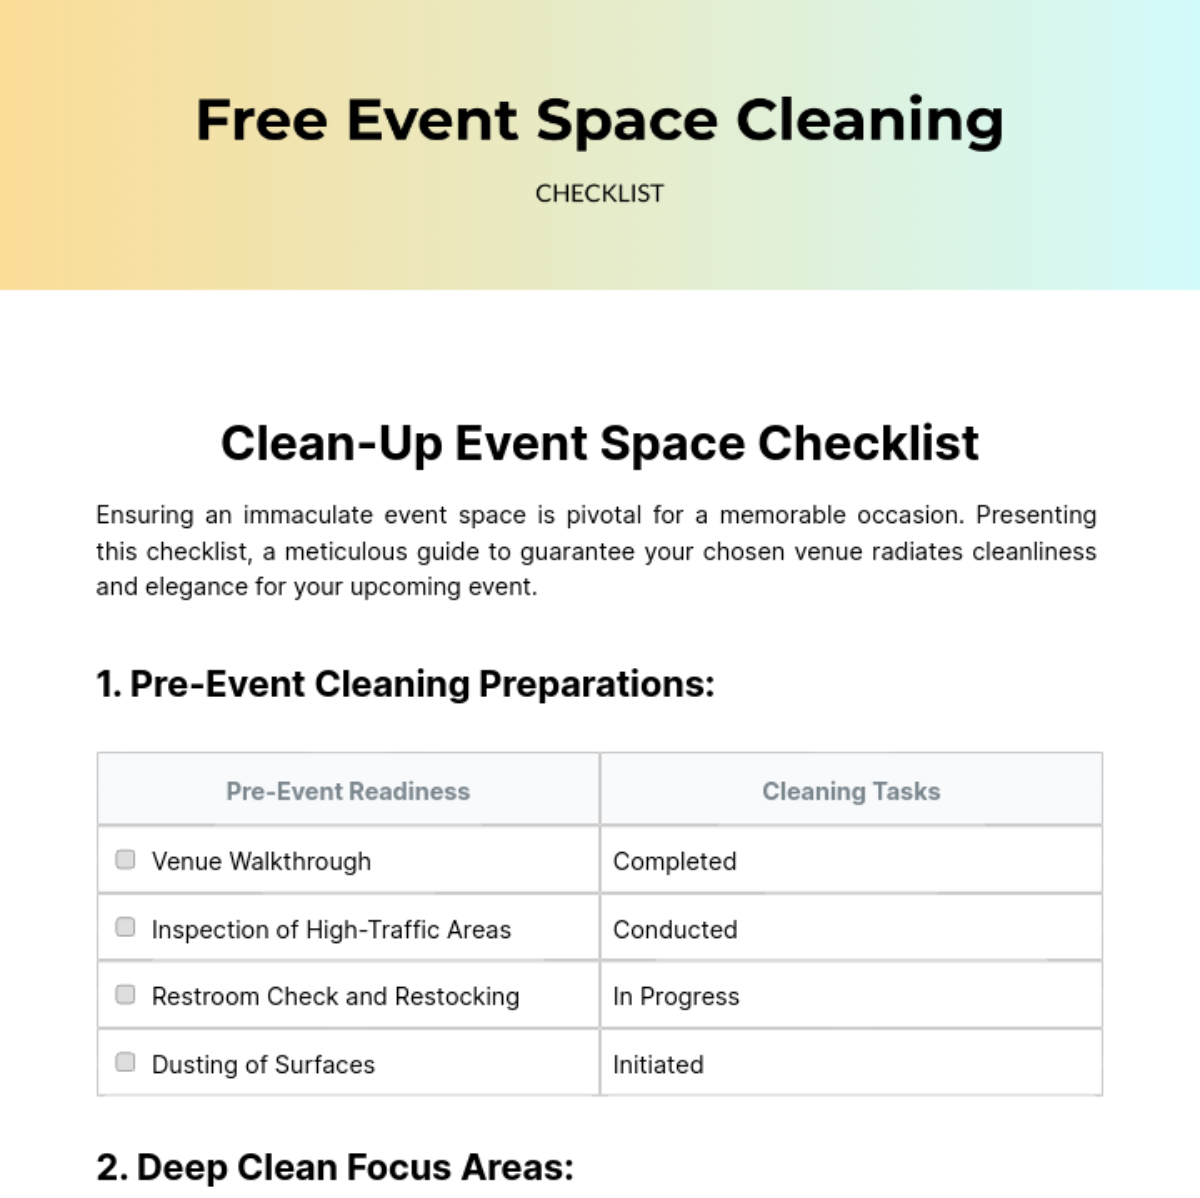 Free Event Space Cleaning Checklist Template